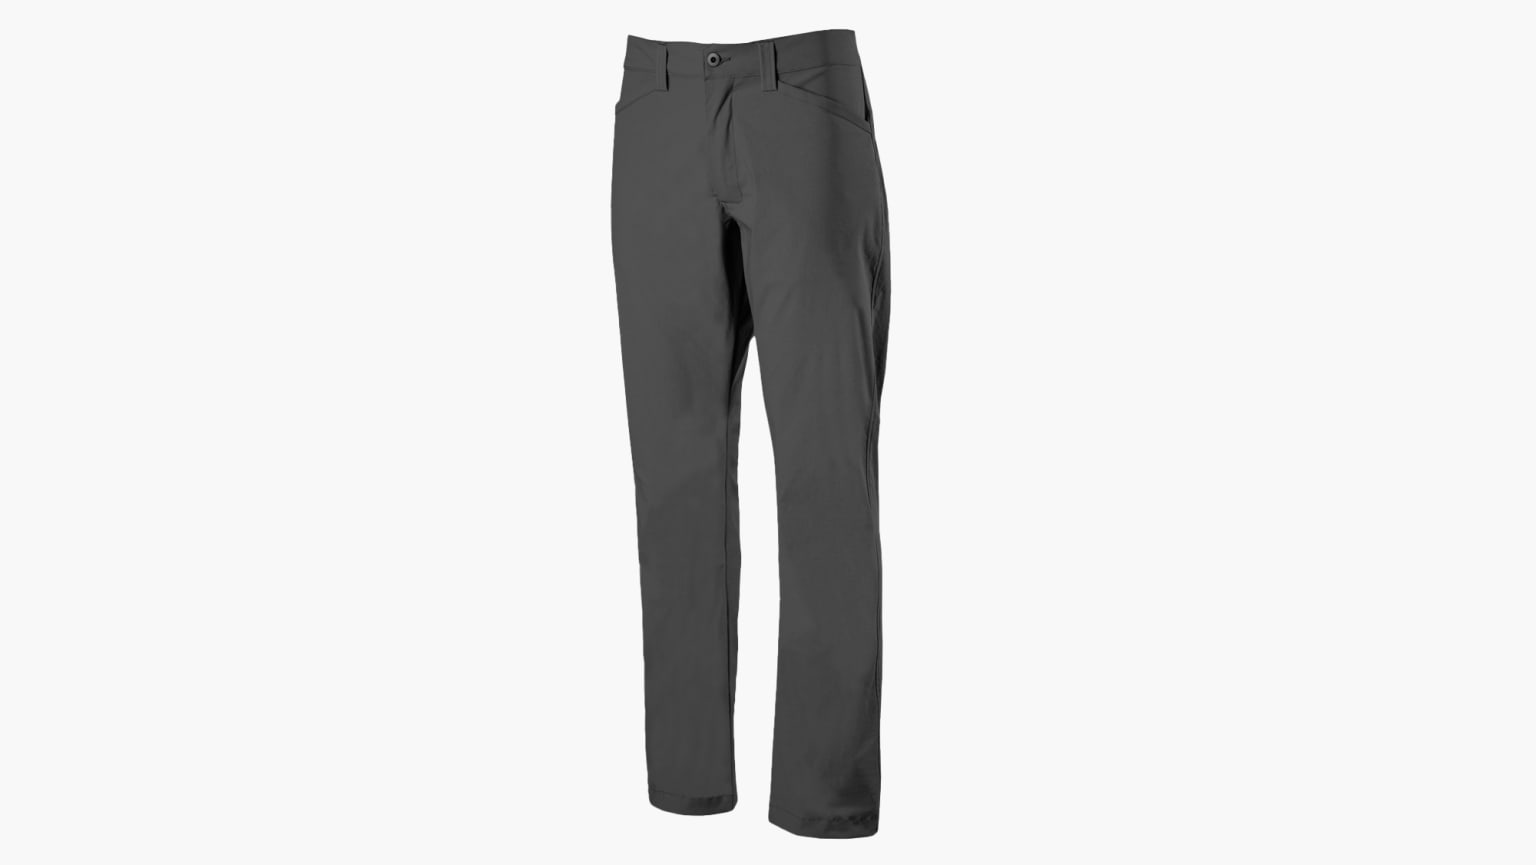 GORUCK Simple Pants - Midweight - Charcoal | Rogue Fitness Canada